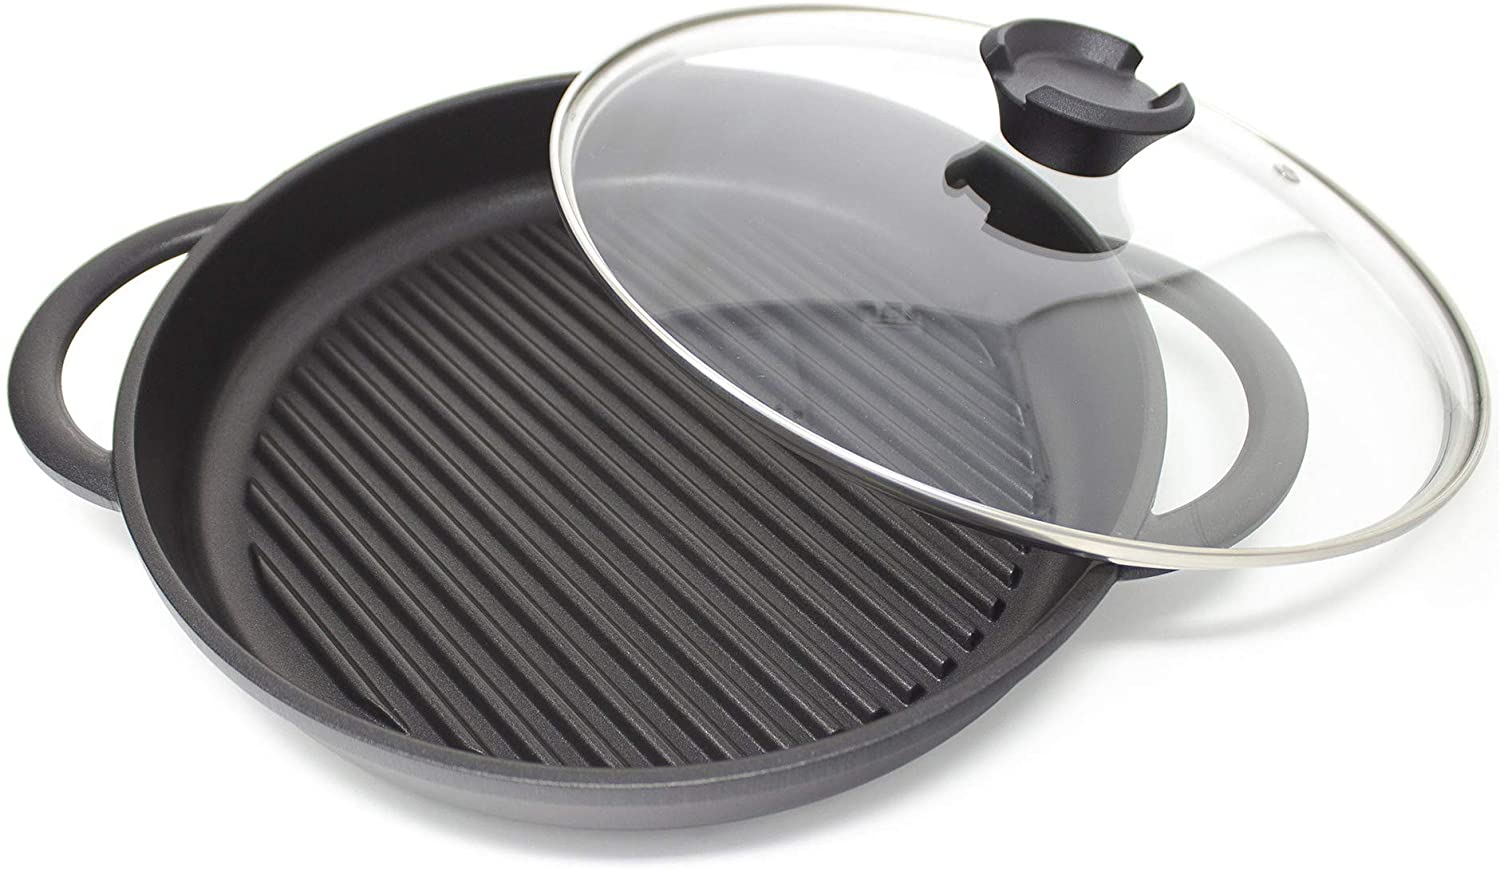 Top Rated Griddle Pan